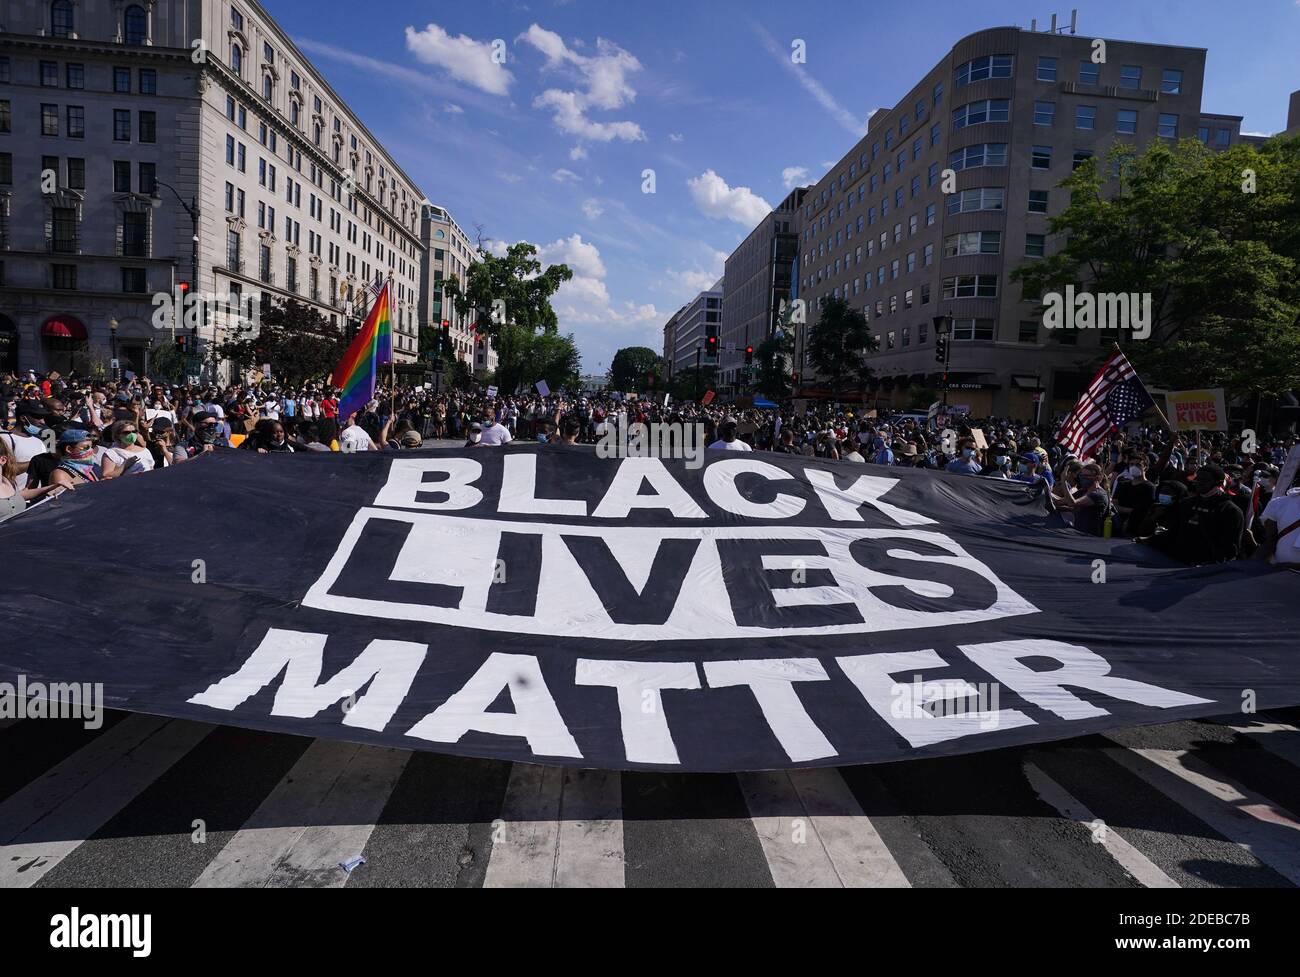 Protesters hold a Black Lives Matter flag when they participate in a protest against racism and police violence in Washington, DC, on Saturday, June 6, 2020. Thousands of protesters in DC and across the nation took to the streets demanding justice for the death of George Floyd, who died in Minneapolis last week after a police officer knelt on his neck for more than eight minutes. Photo by Kevin Dietsch/UPI Stock Photo